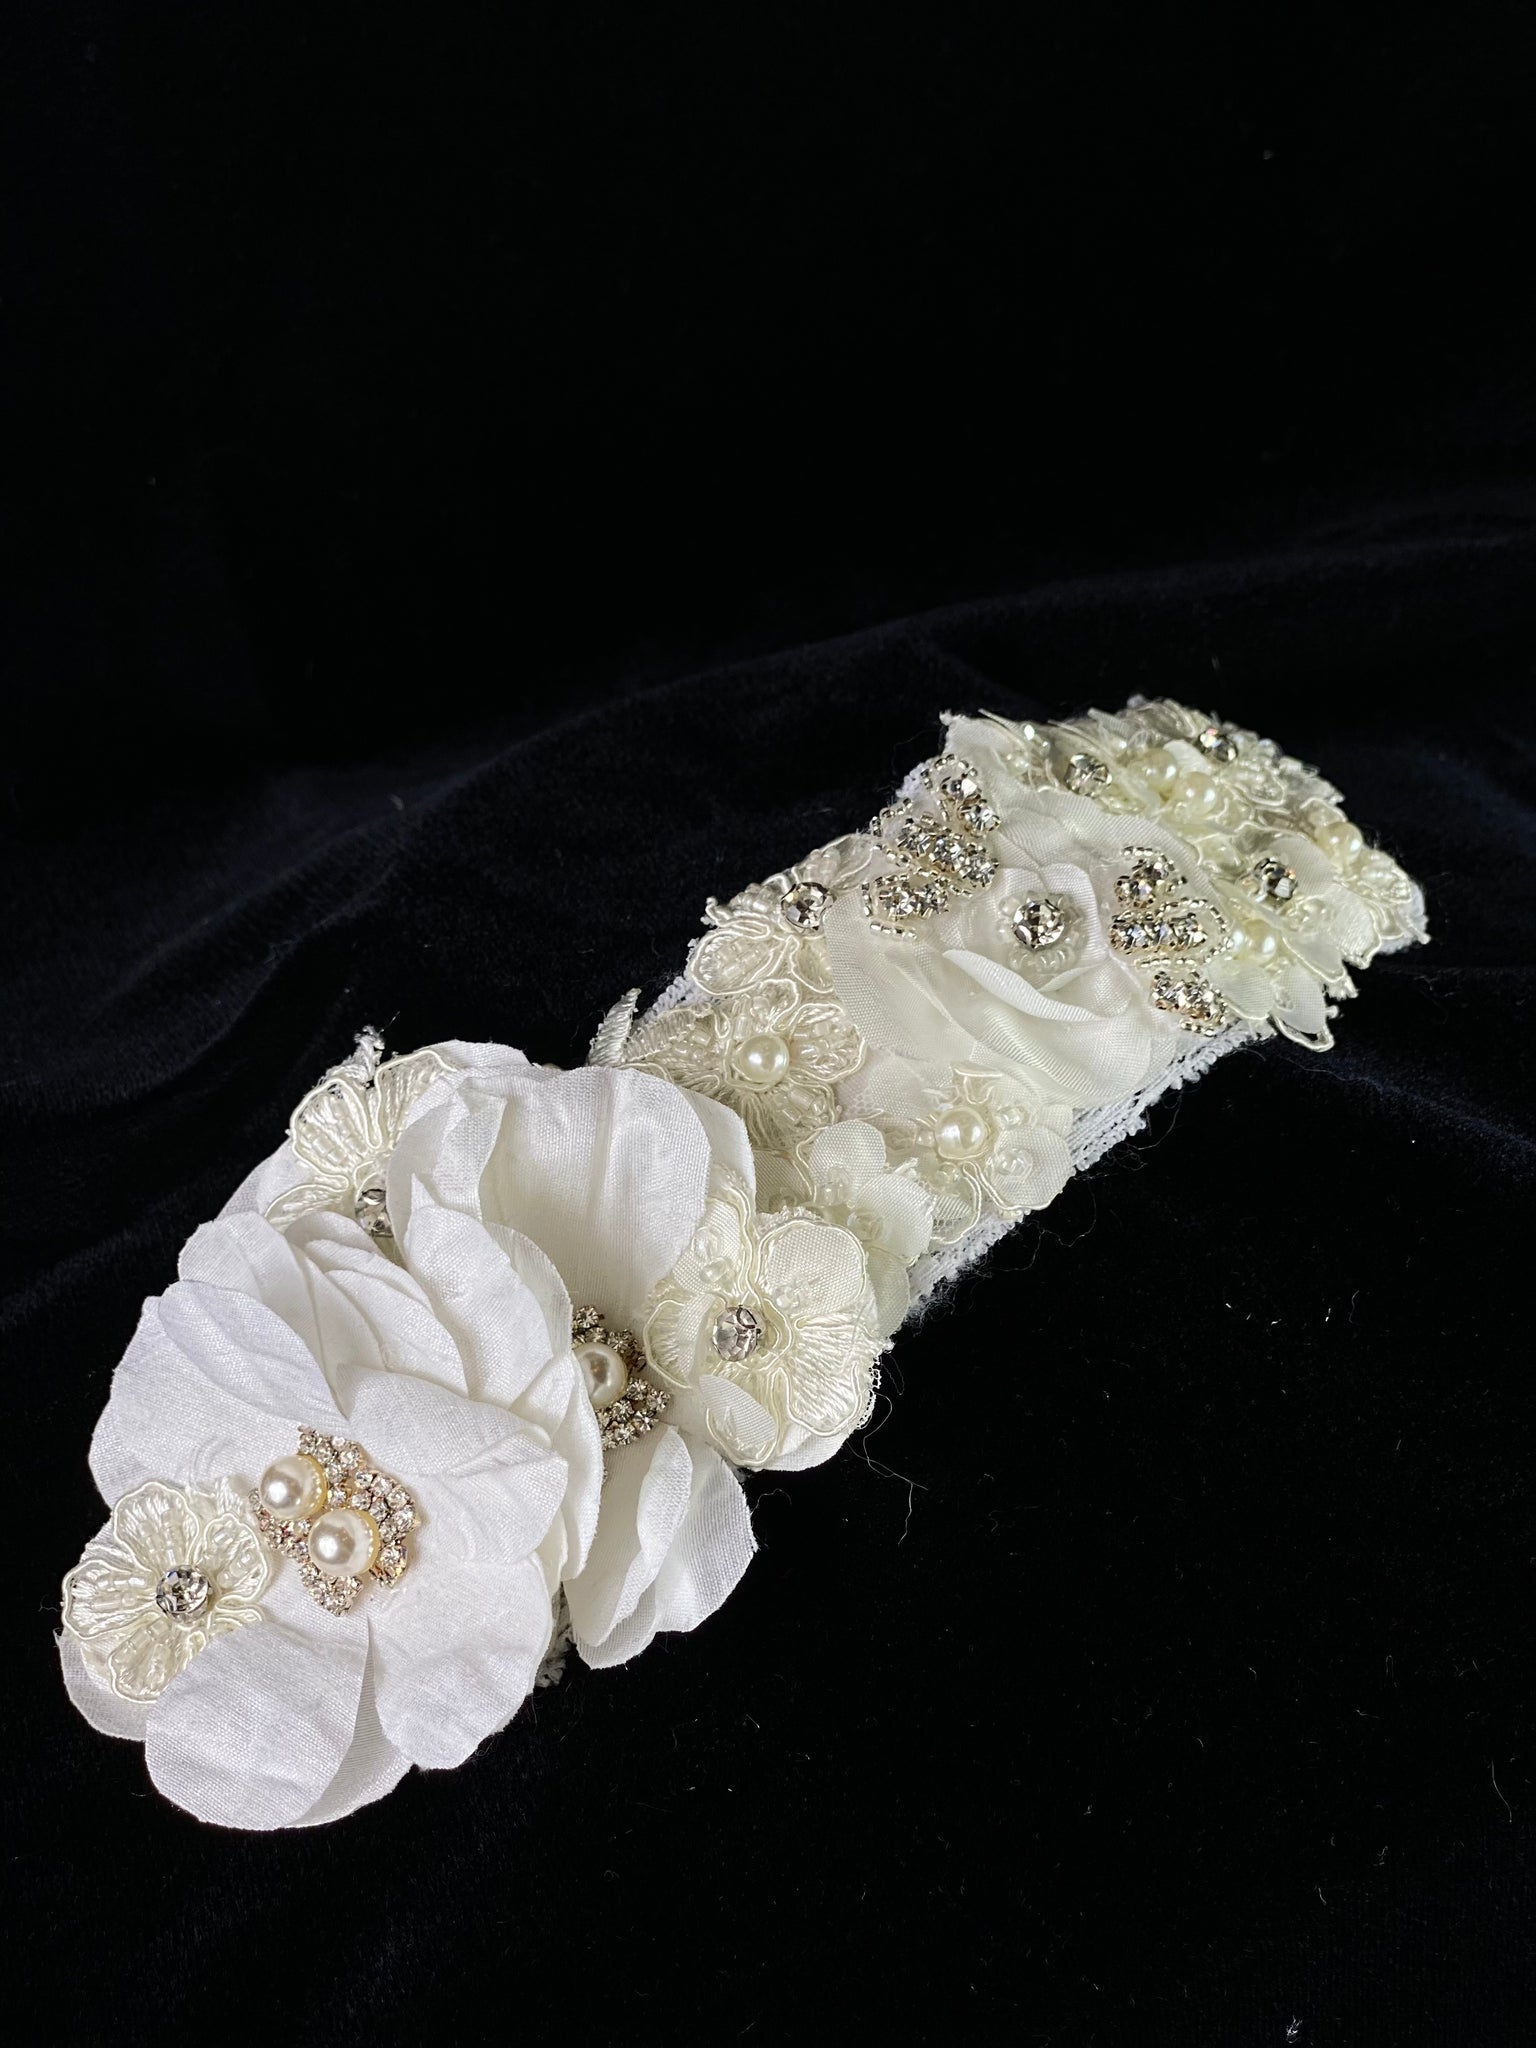 aptism Headwrap - White Flower with Ivory Band & Pearls & RhinestonesThis is an elegant handmade and one-of-a-kind headwrap with a large White flowers and Ivory band.  The large flowers are uniquely decorated with rhinestones and pearls.  The elastic headwrap is made of a soft ivory satin with an intricate and original design made up of flowers and jewels.  This headwrap can be worn with dresses from Stelalysa's Baptism & Celebration/Pageant Collections and for any occasion!  It fits best on girls ages 1-6.